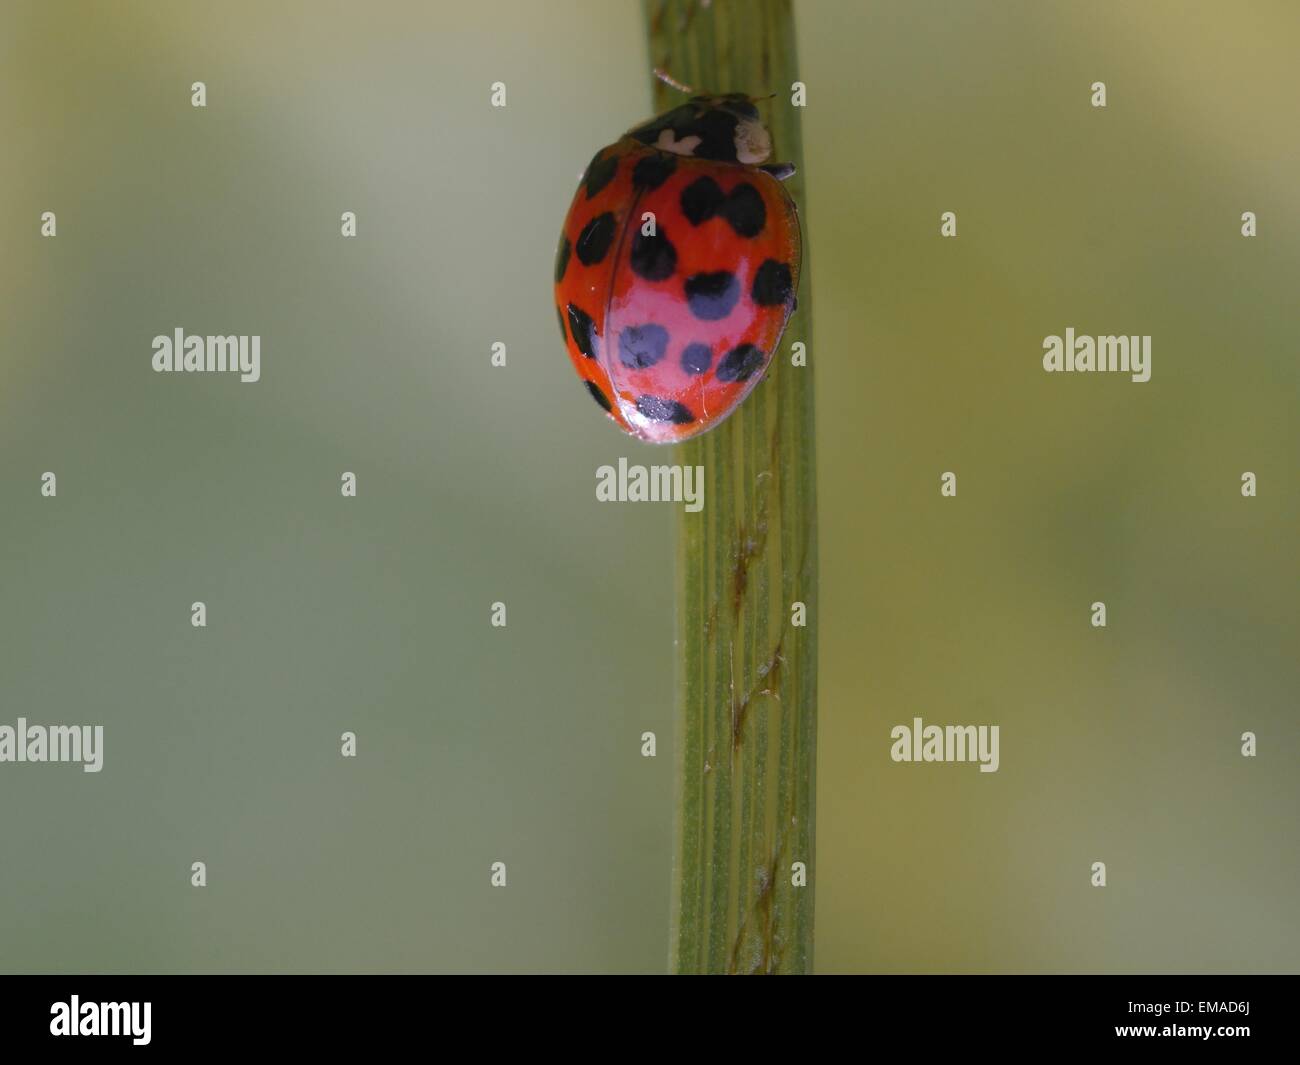 wandering after stalk of grass ladybug Stock Photo